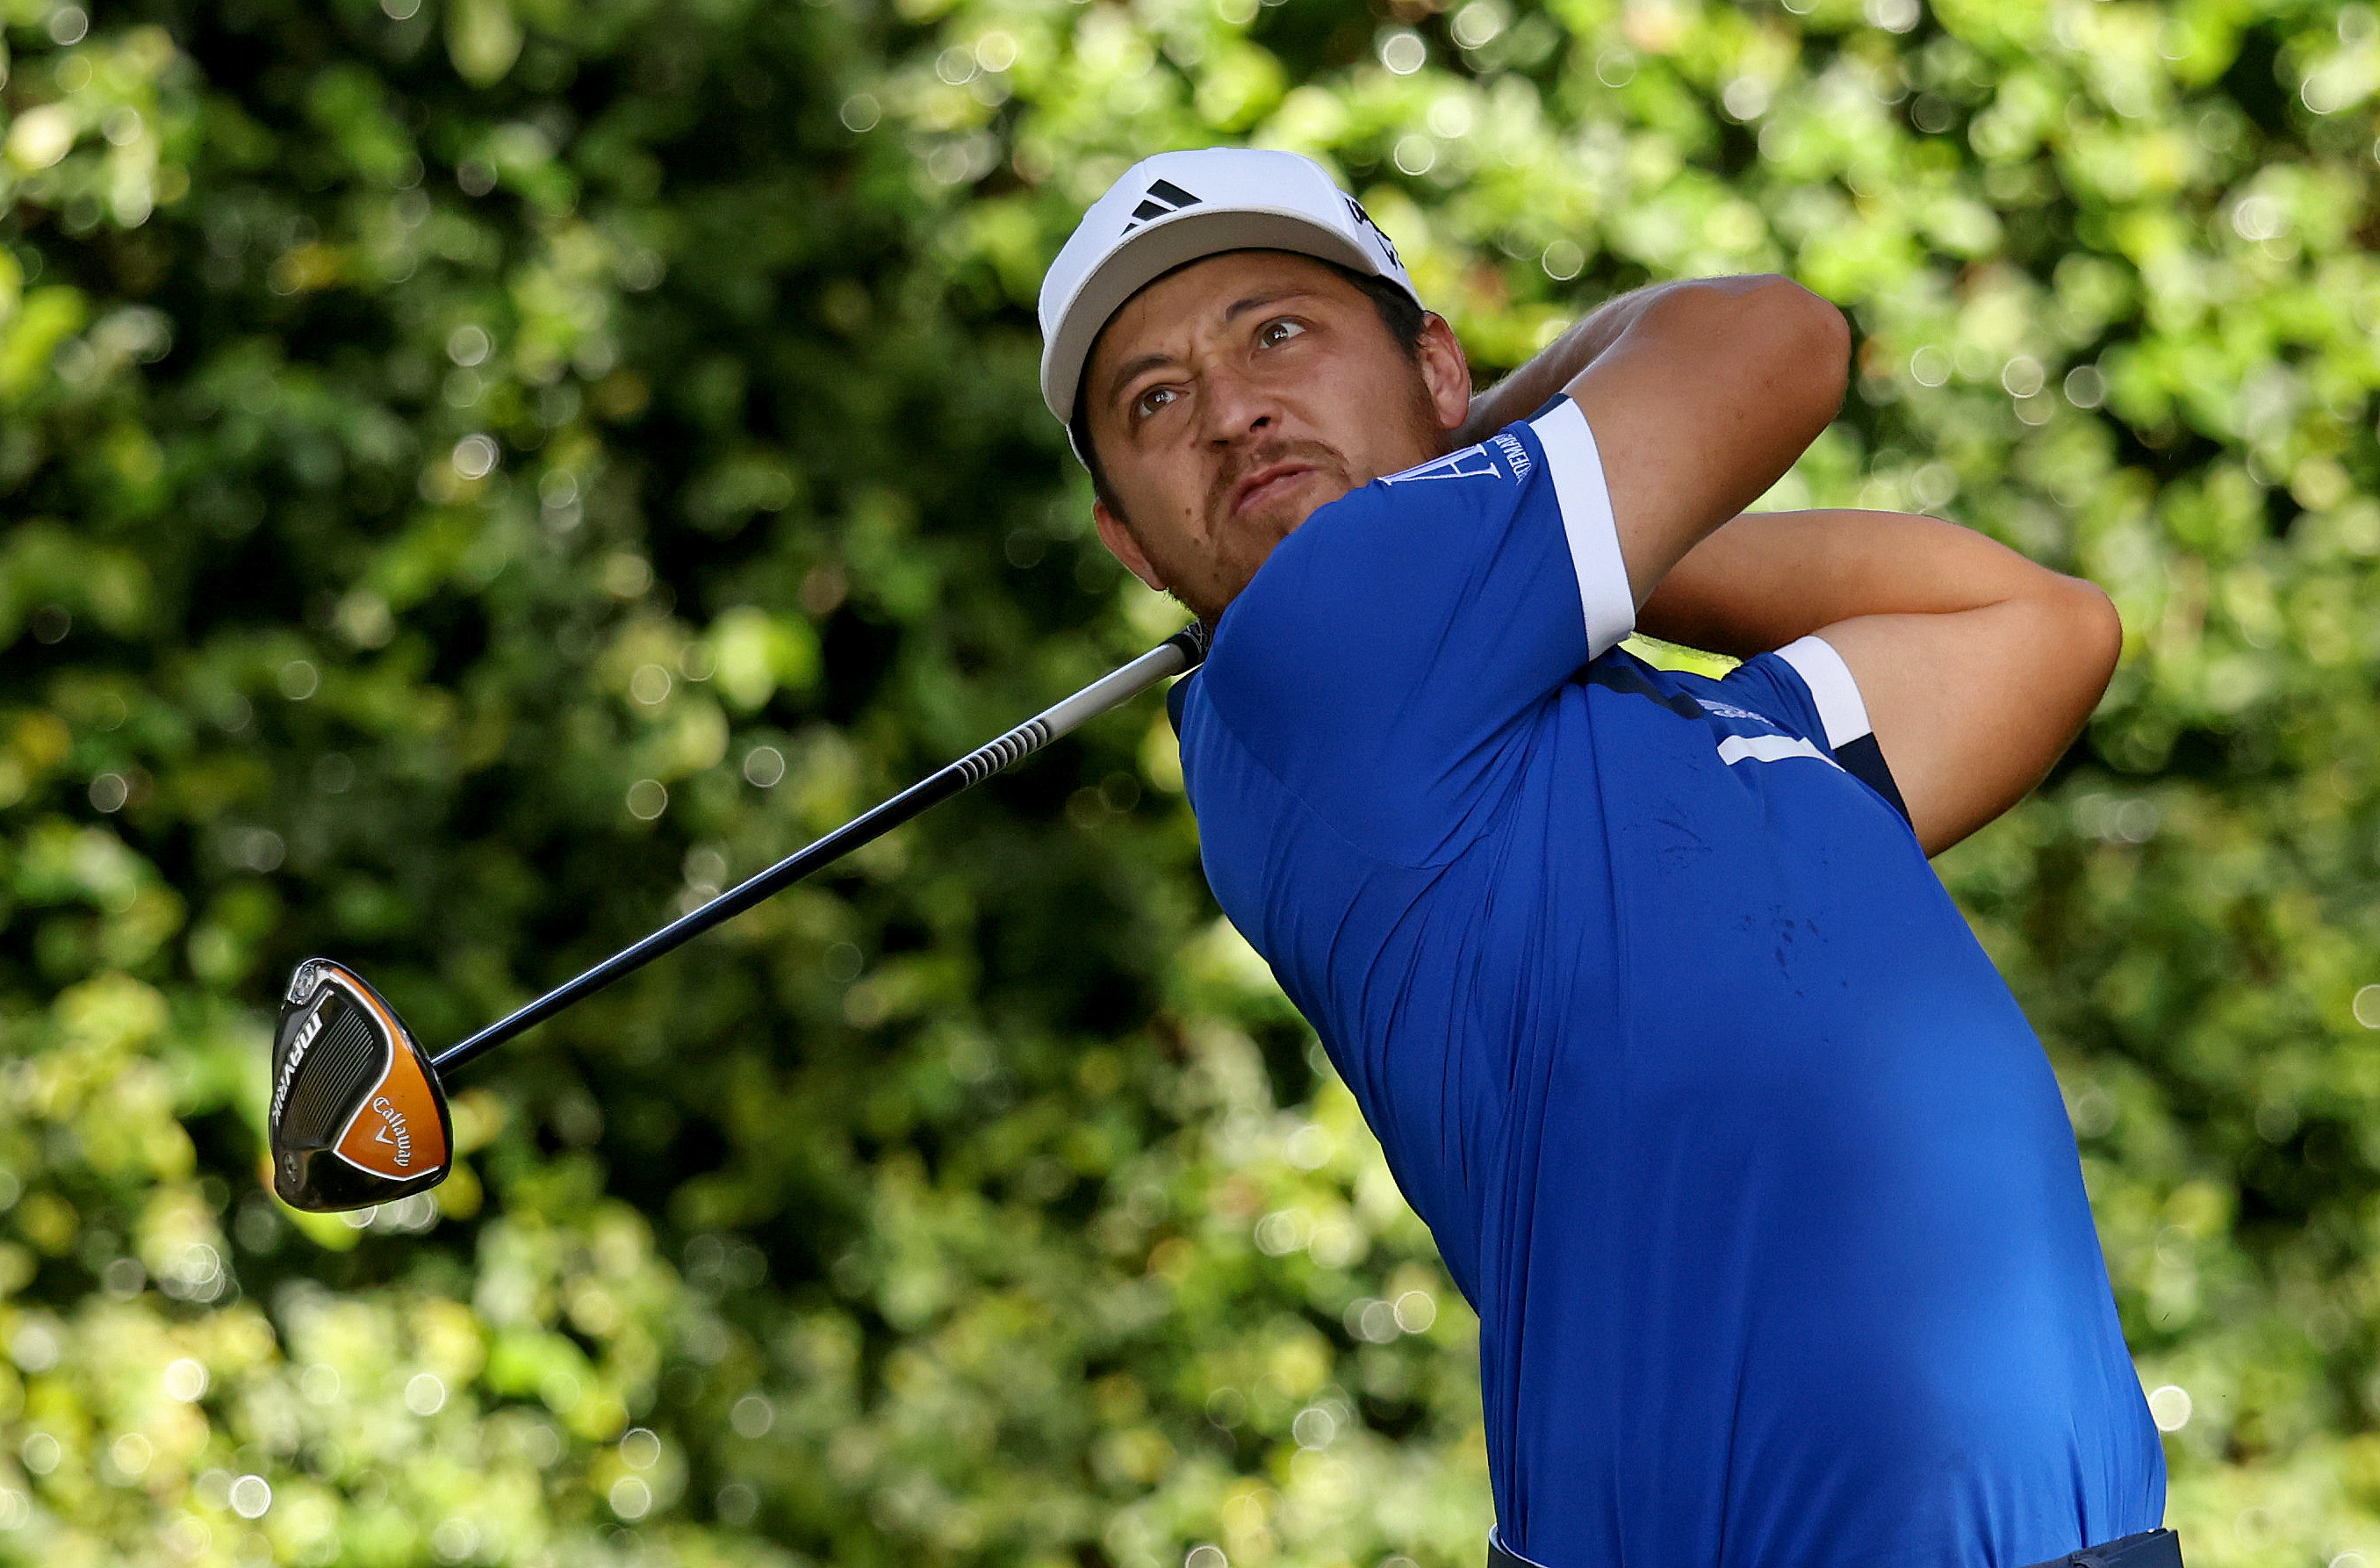 Golf star Xander Schauffele recently had COVID-19, and he isn't mincing words about his forced quarantine. Schauffele even said he felt "sick as a dog."